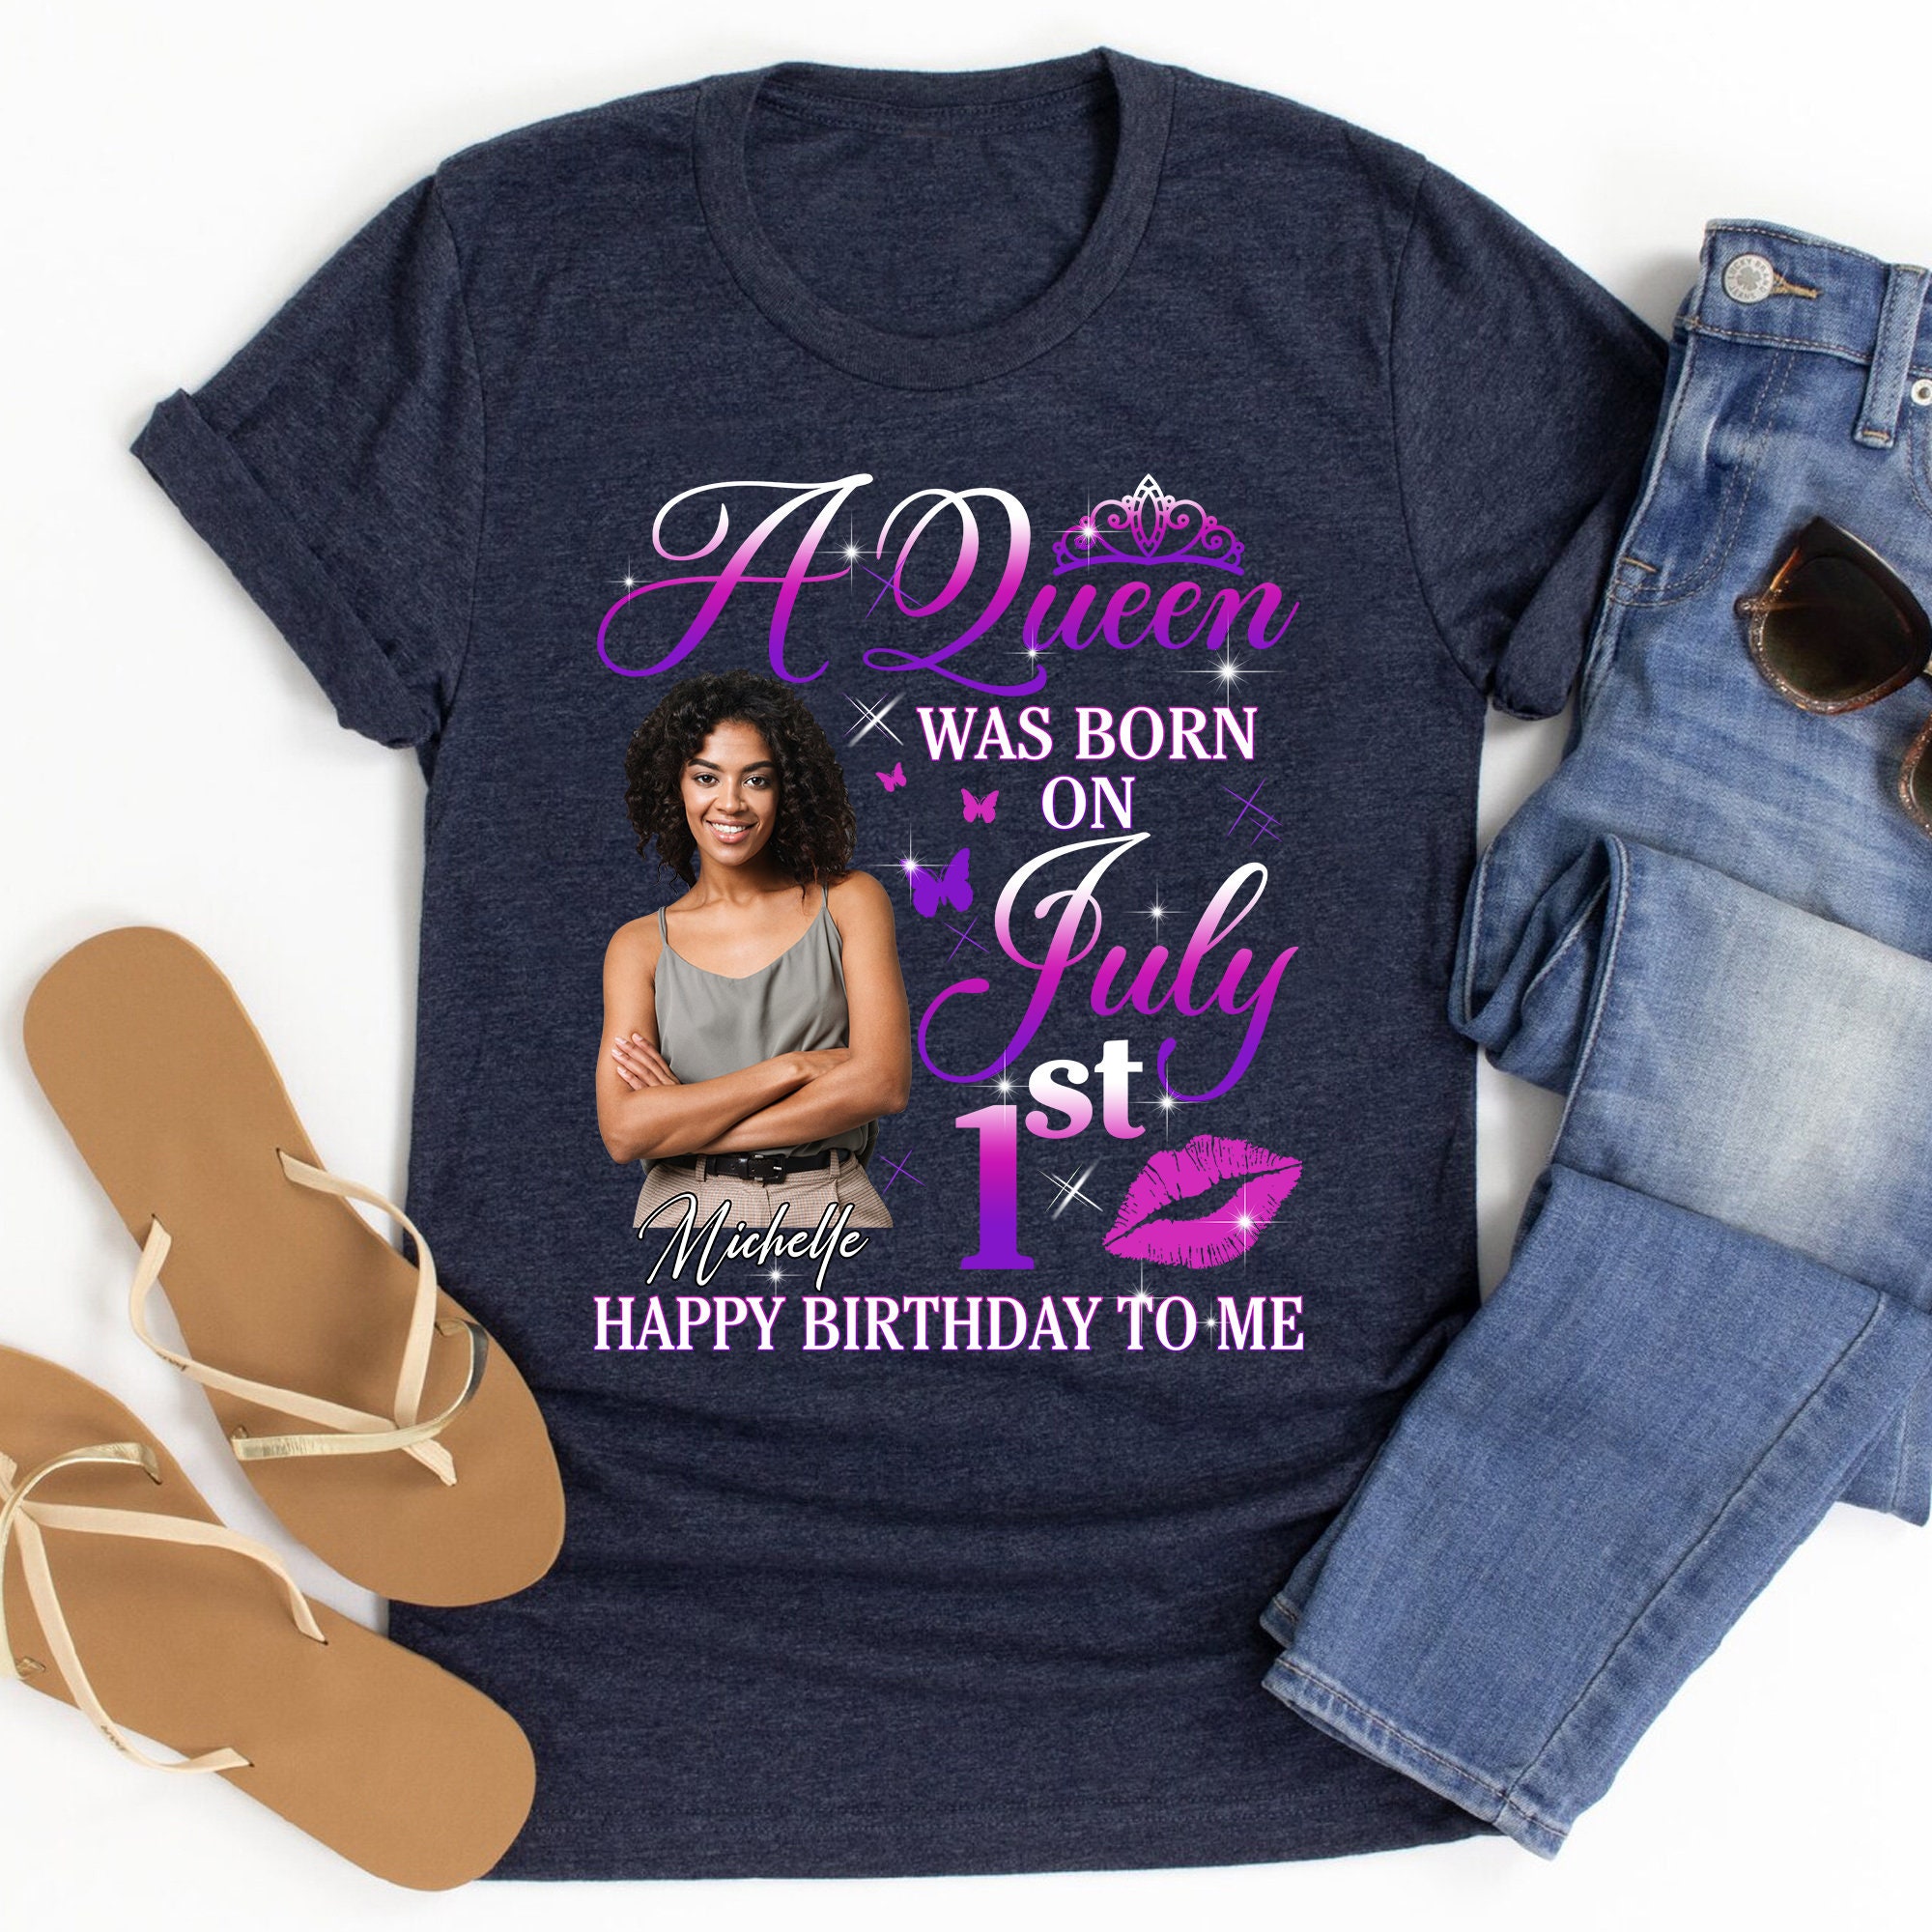 Discover Personalized Birthday Shirt For Women with Your Photo, Custom Birthday T Shirt, Personalized Birthday Gift, Customized Shirt